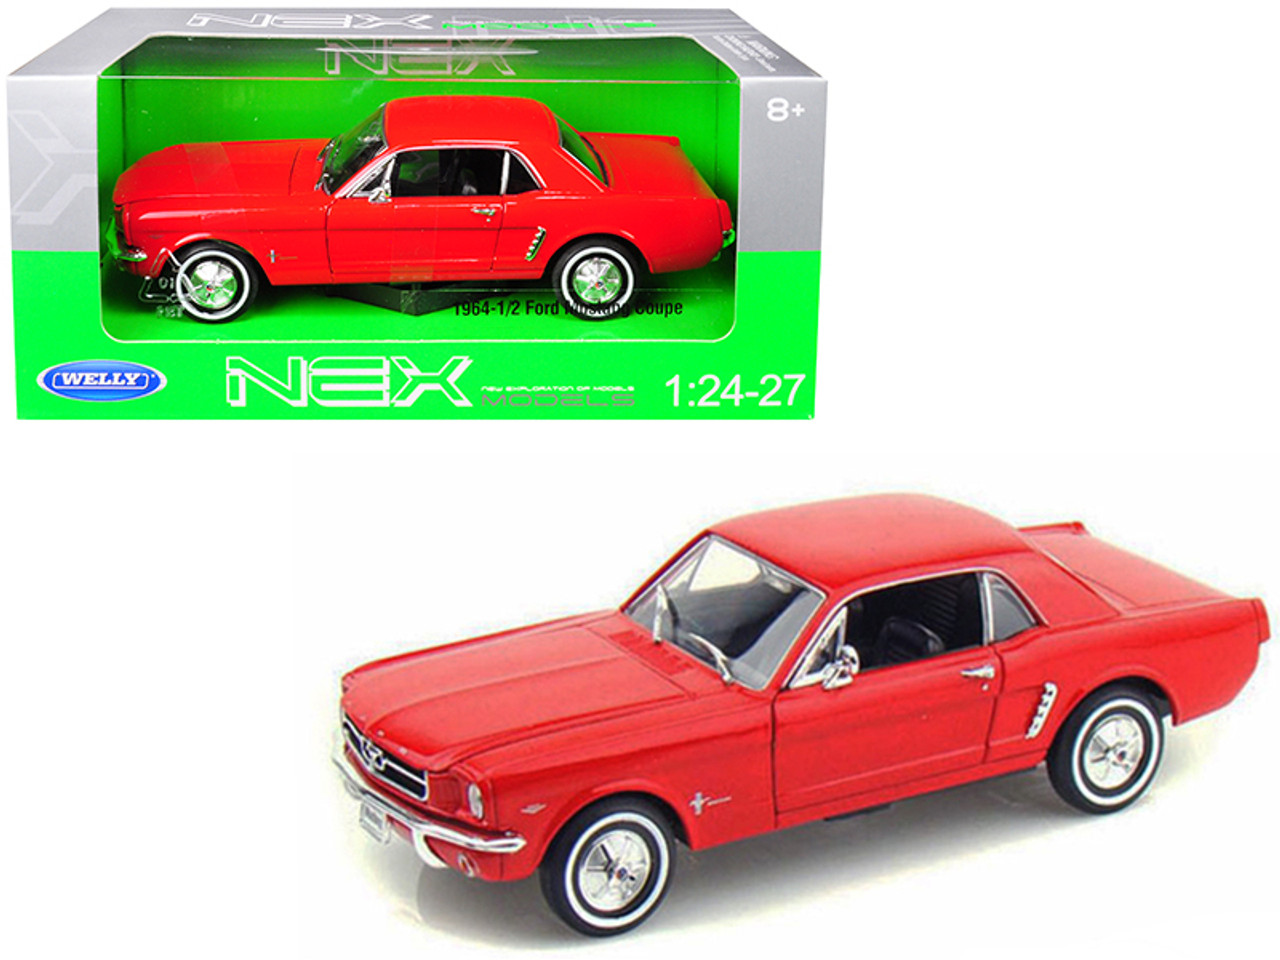 1964 1/2 Ford Mustang Coupe Hardtop Red 1/24-1/27 Diecast Model Car by Welly